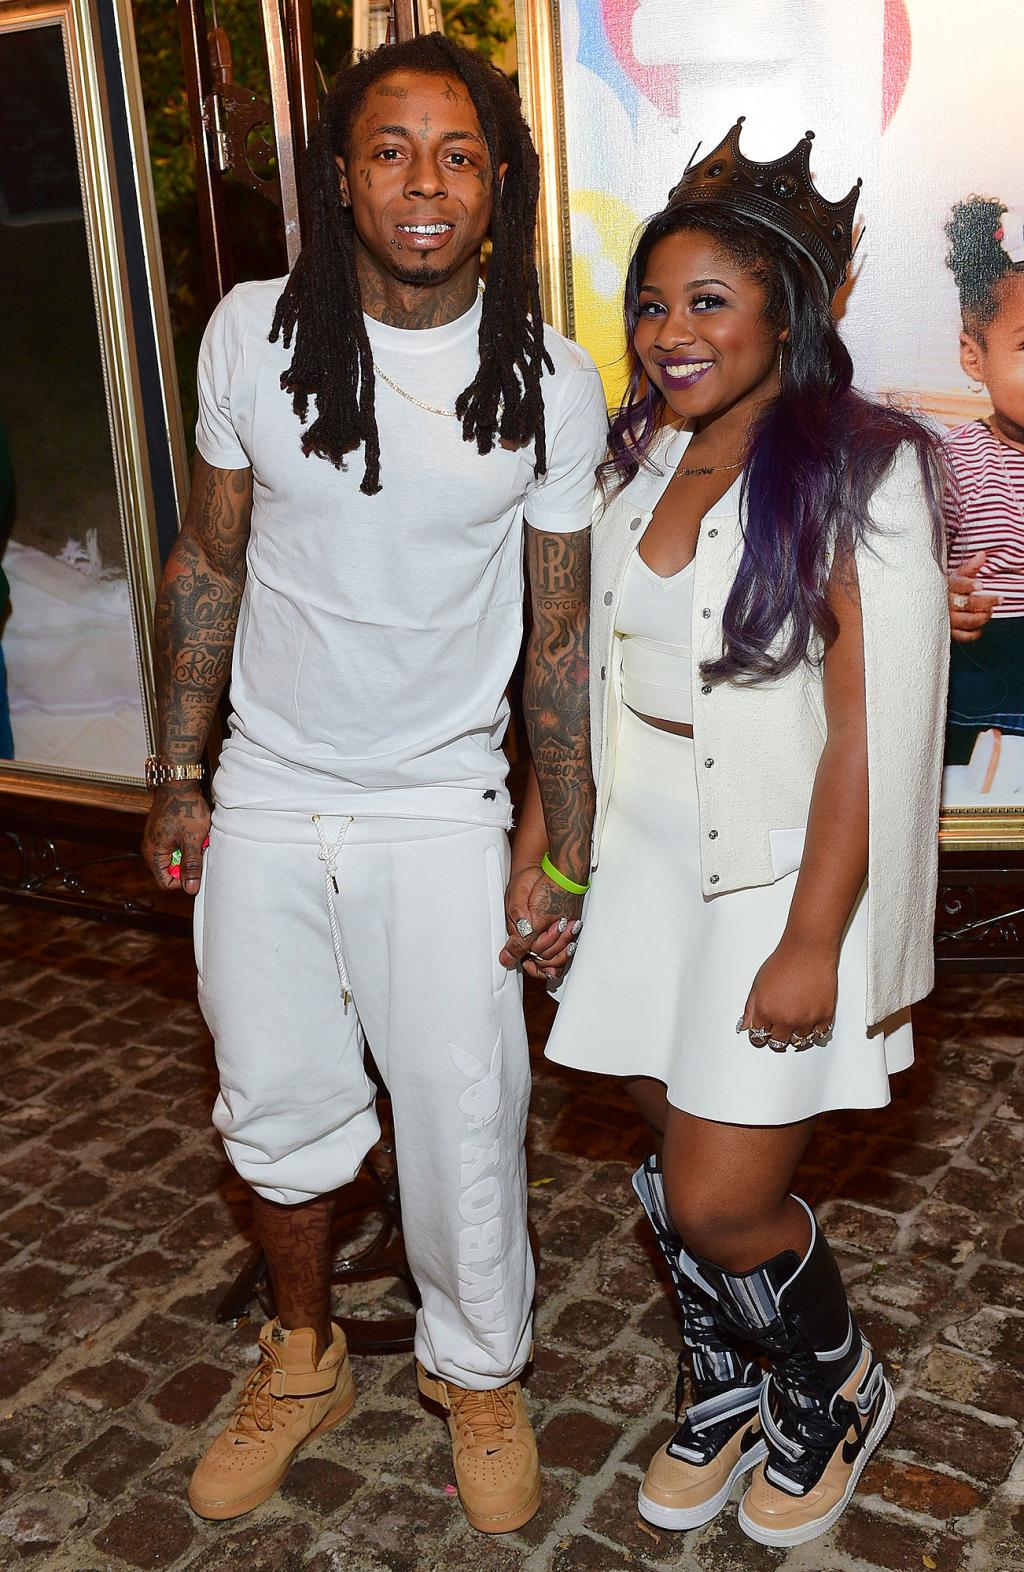 Lil Wayne Is        Doing Fine      '  After Seizure Reports, Daughter Says:        Don       't Believe Everything You    Hear        